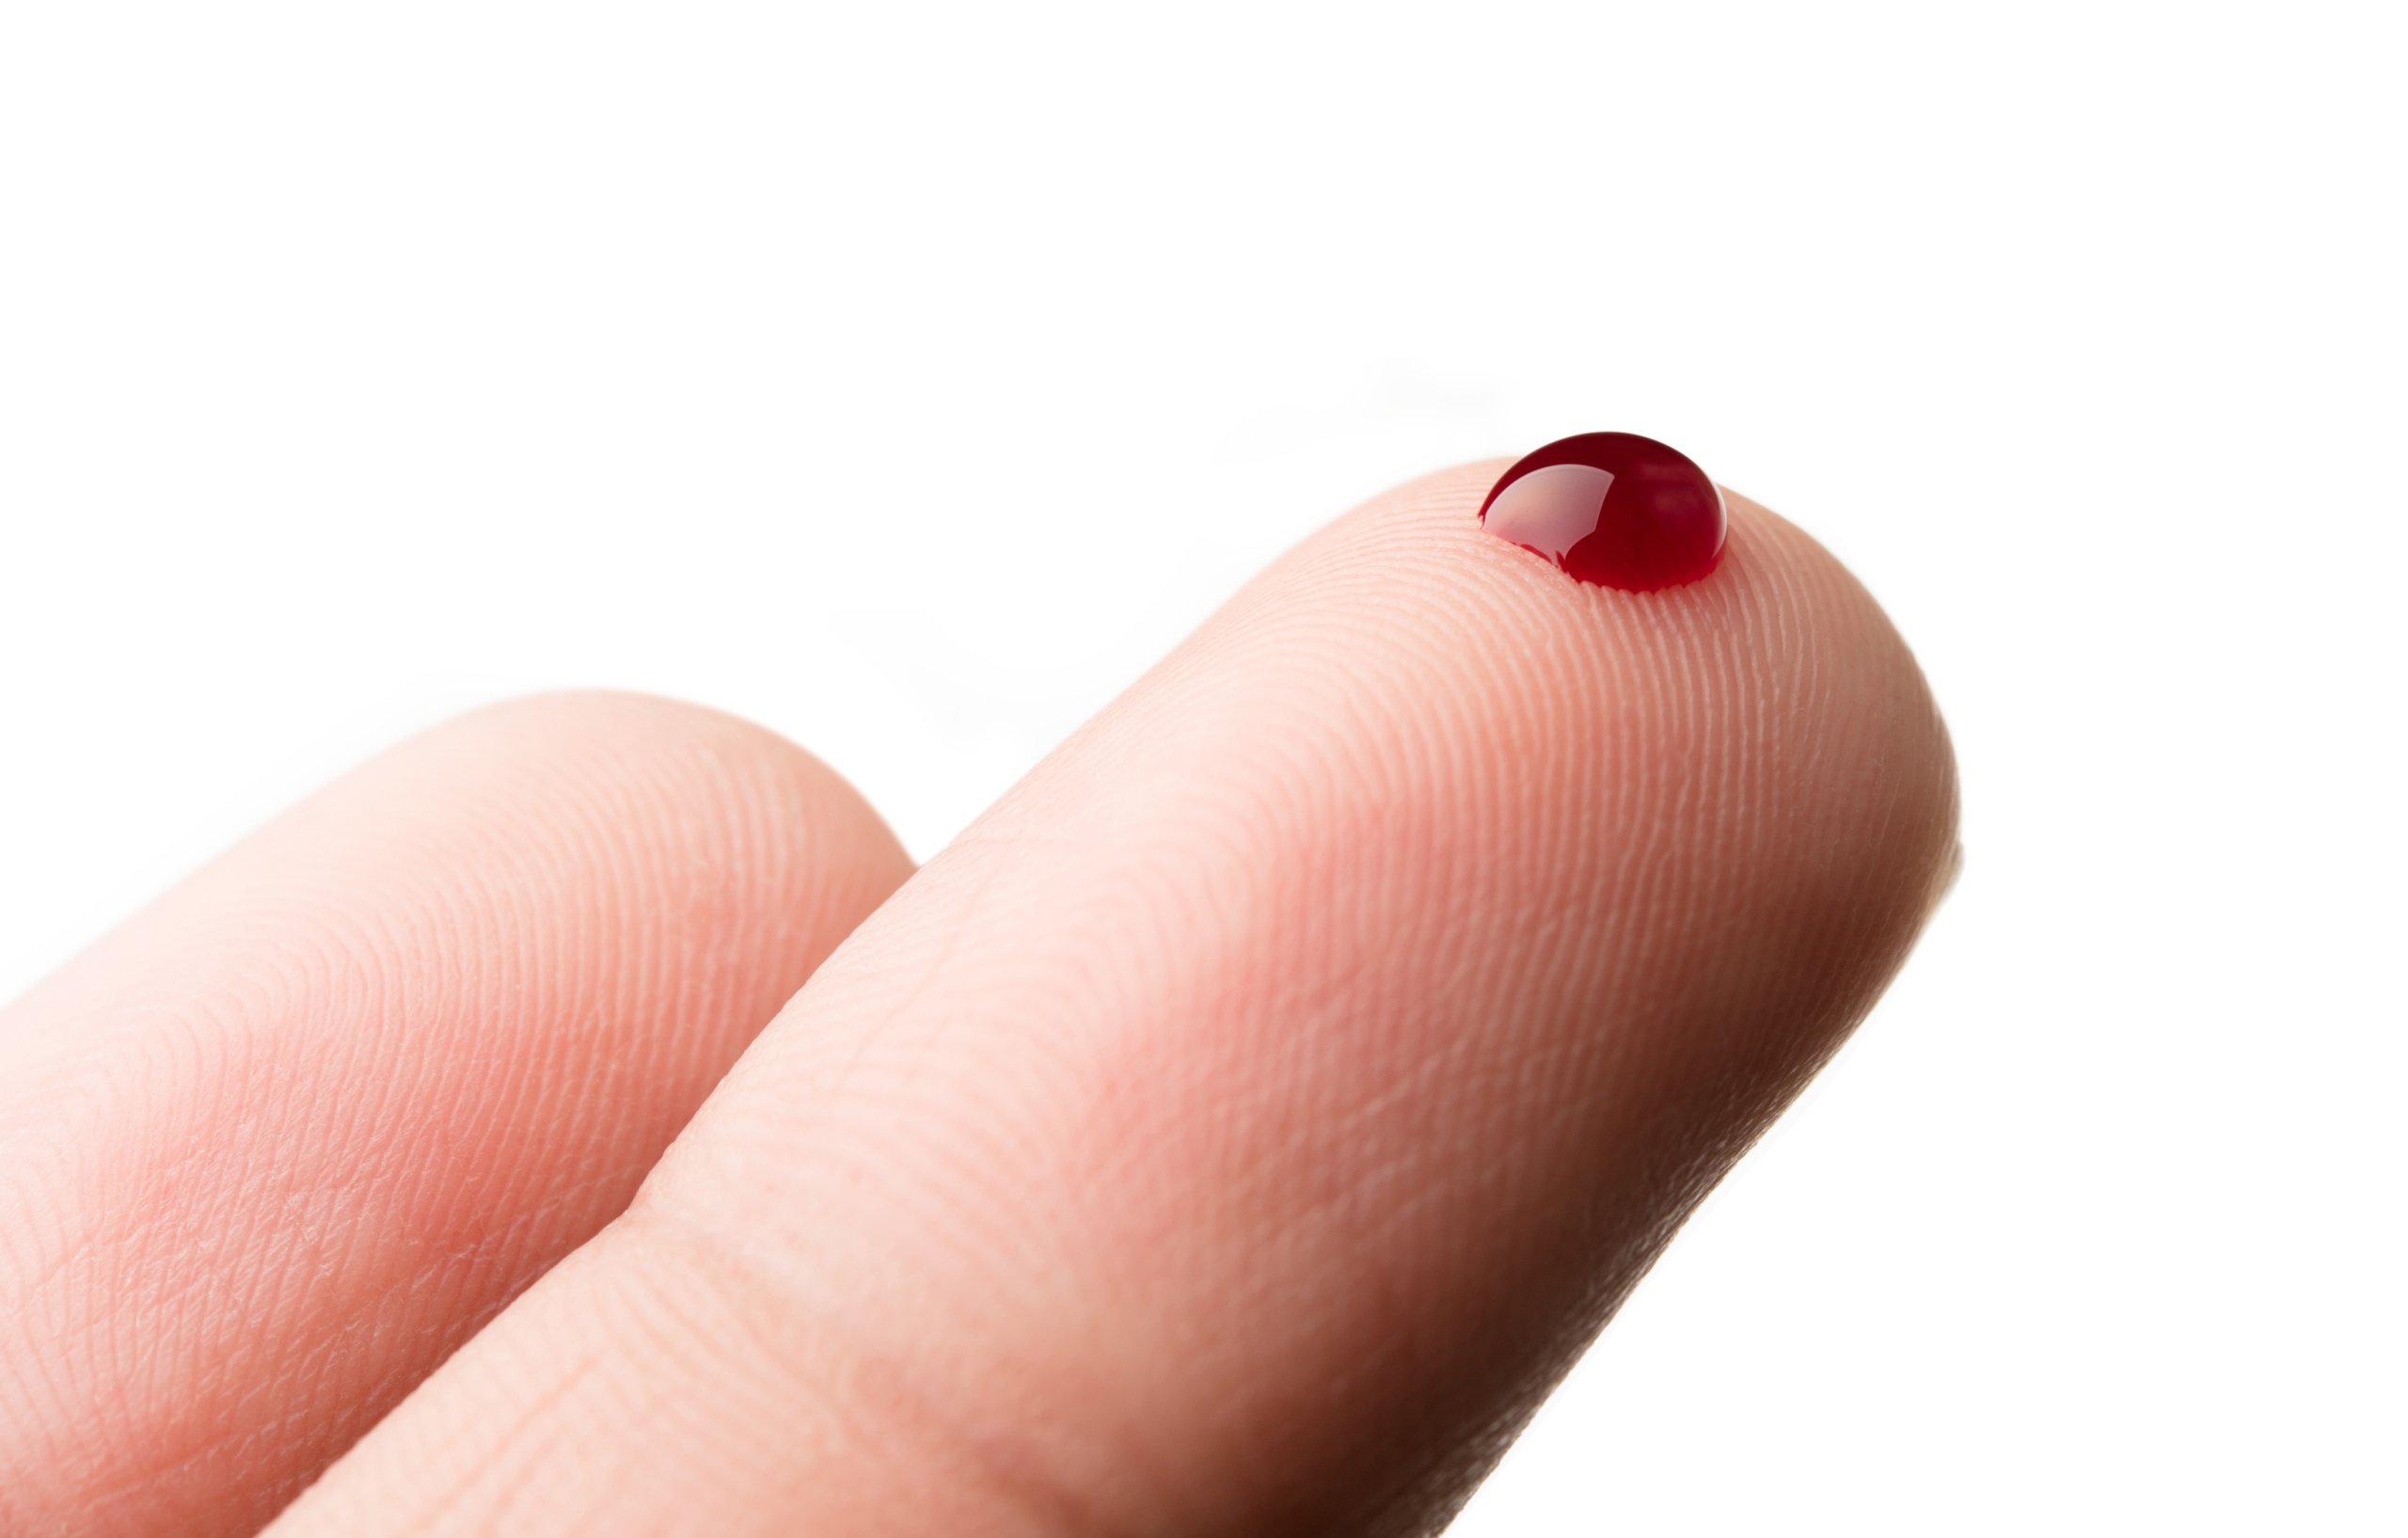 Is Blood or Pus from a Large Pimple Naajis and Does It Break Wudu? -